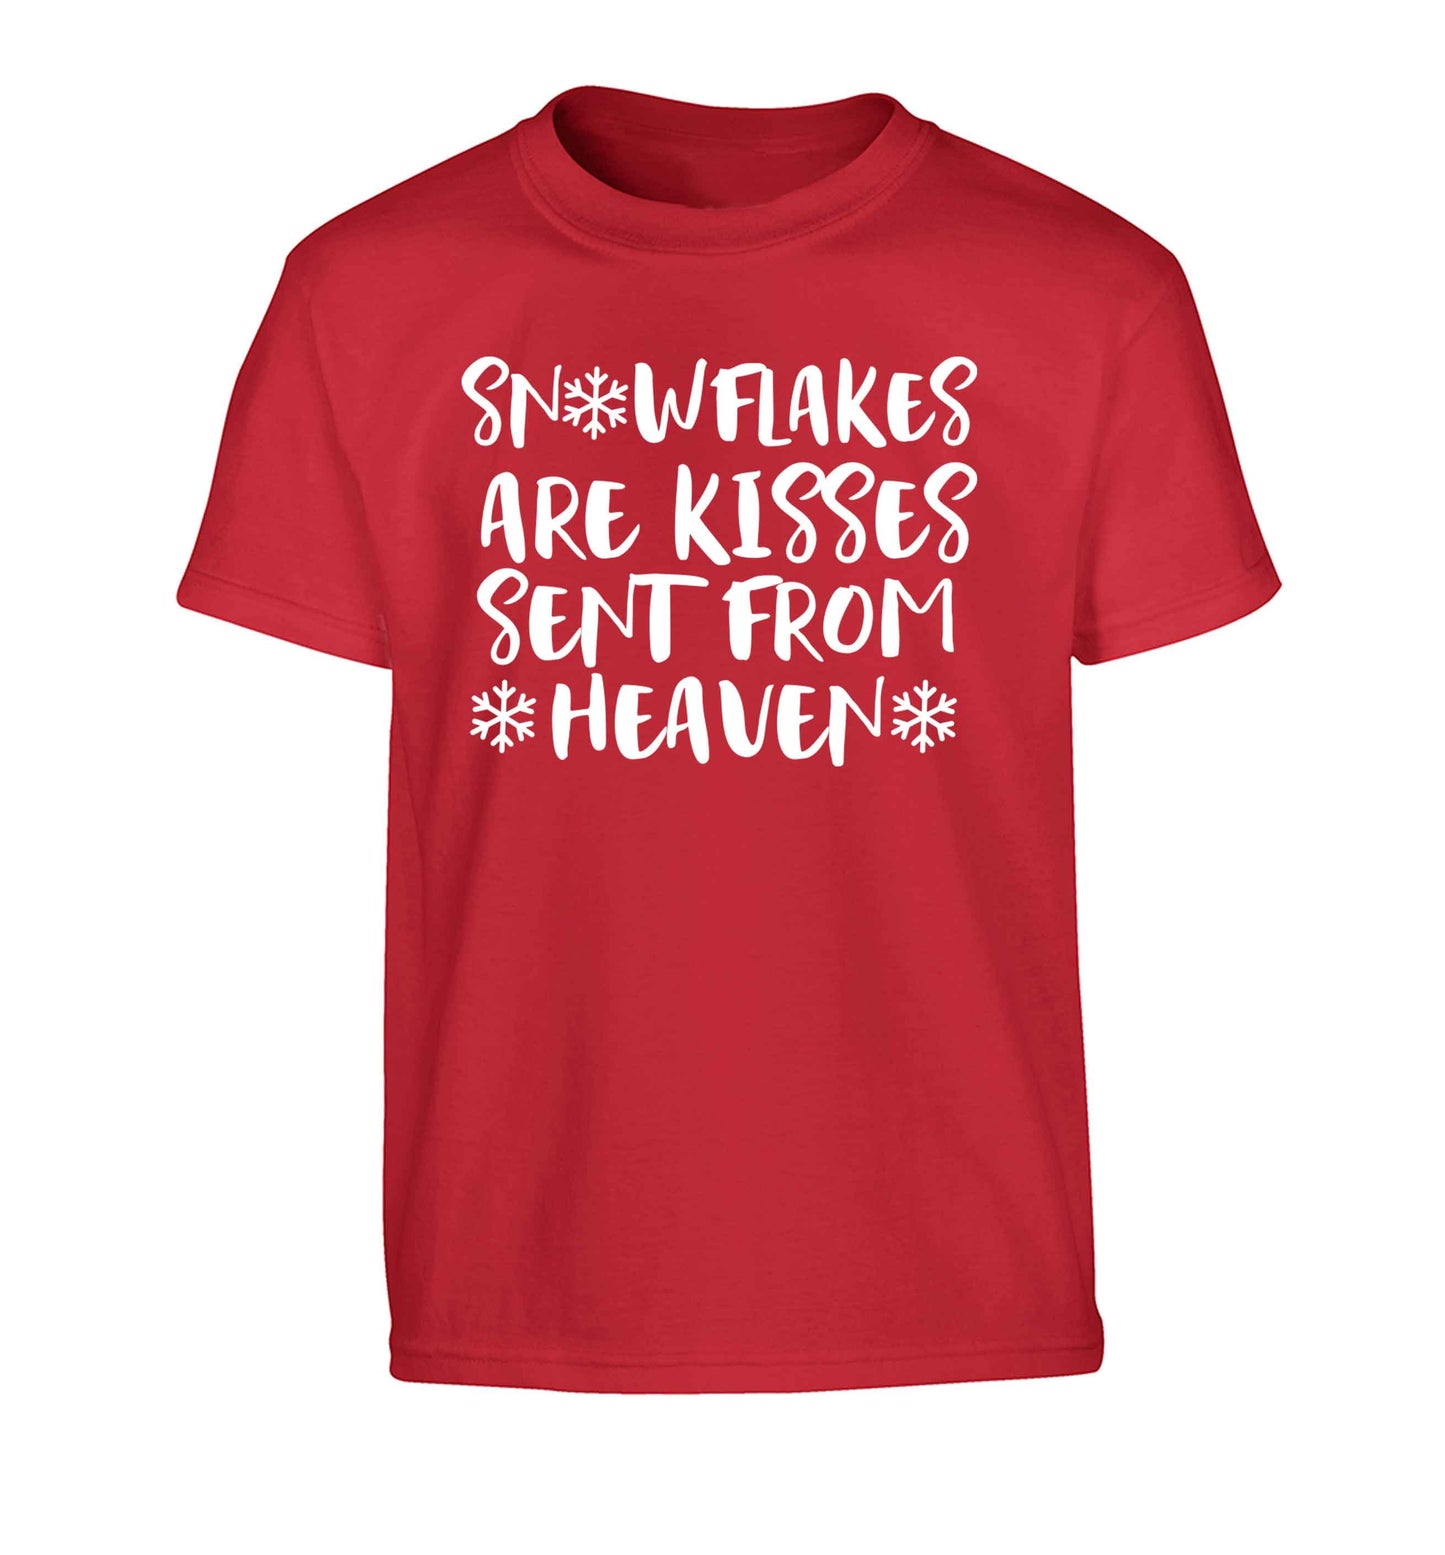 Snowflakes are kisses sent from heaven Children's red Tshirt 12-13 Years